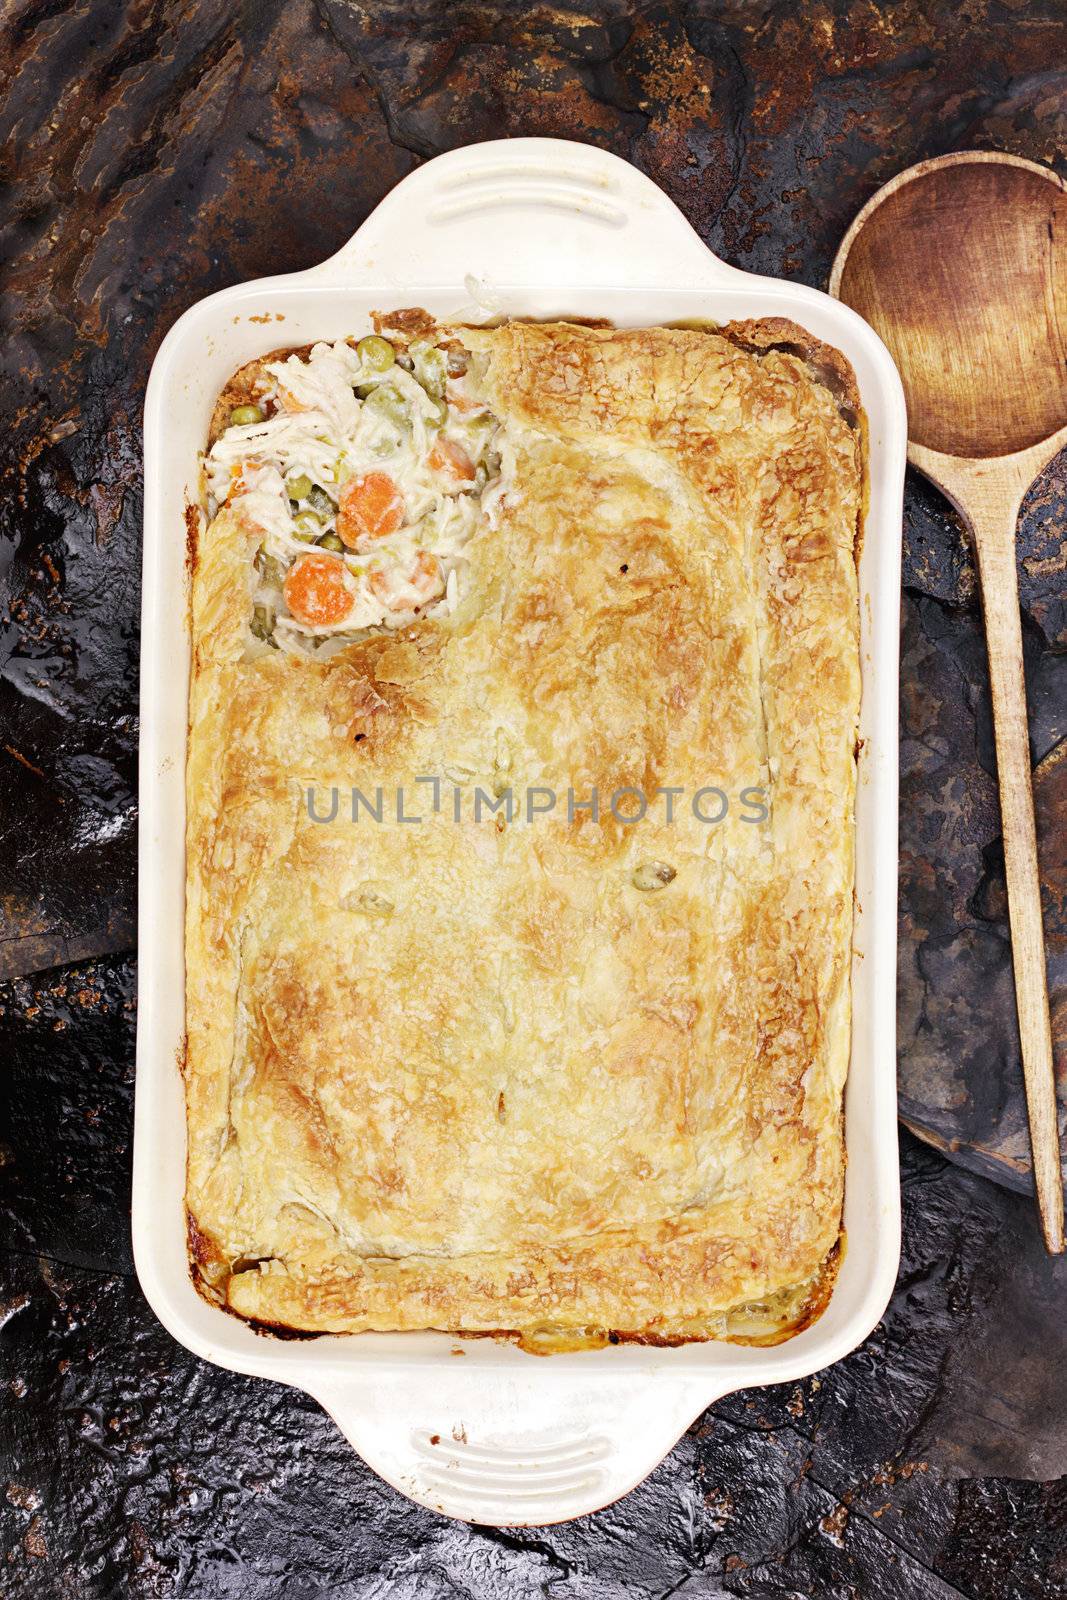 Above view of fresh Chicken Pot Pie with wooden spoon. Section of pot pie removed to reveal chicken, carrots and peas.                    

